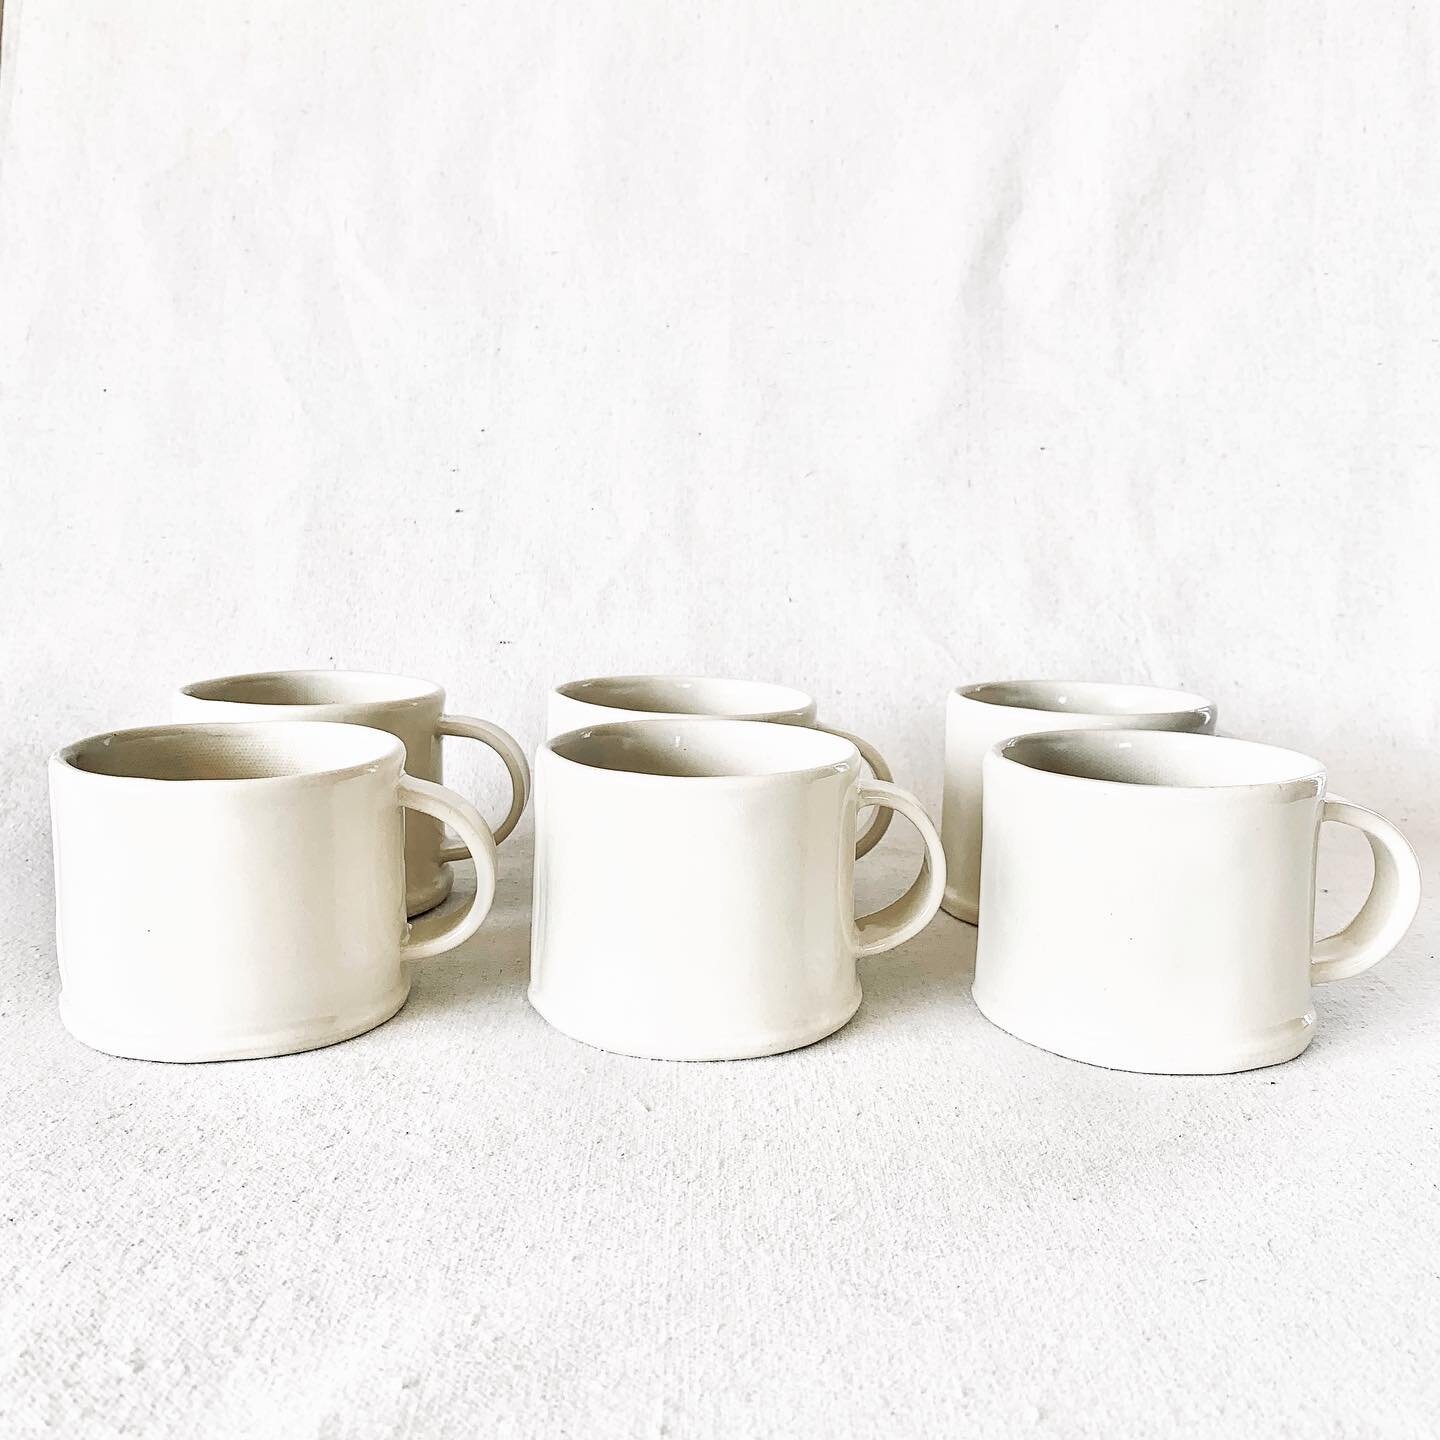 what should I call these new 12 oz. seamed mugs with a the loop handle? 
if you have been following along, I have the listening series of handles too. I do love a soft metaphor to carry an open ended story. 
As I made these I wondered if the connecti